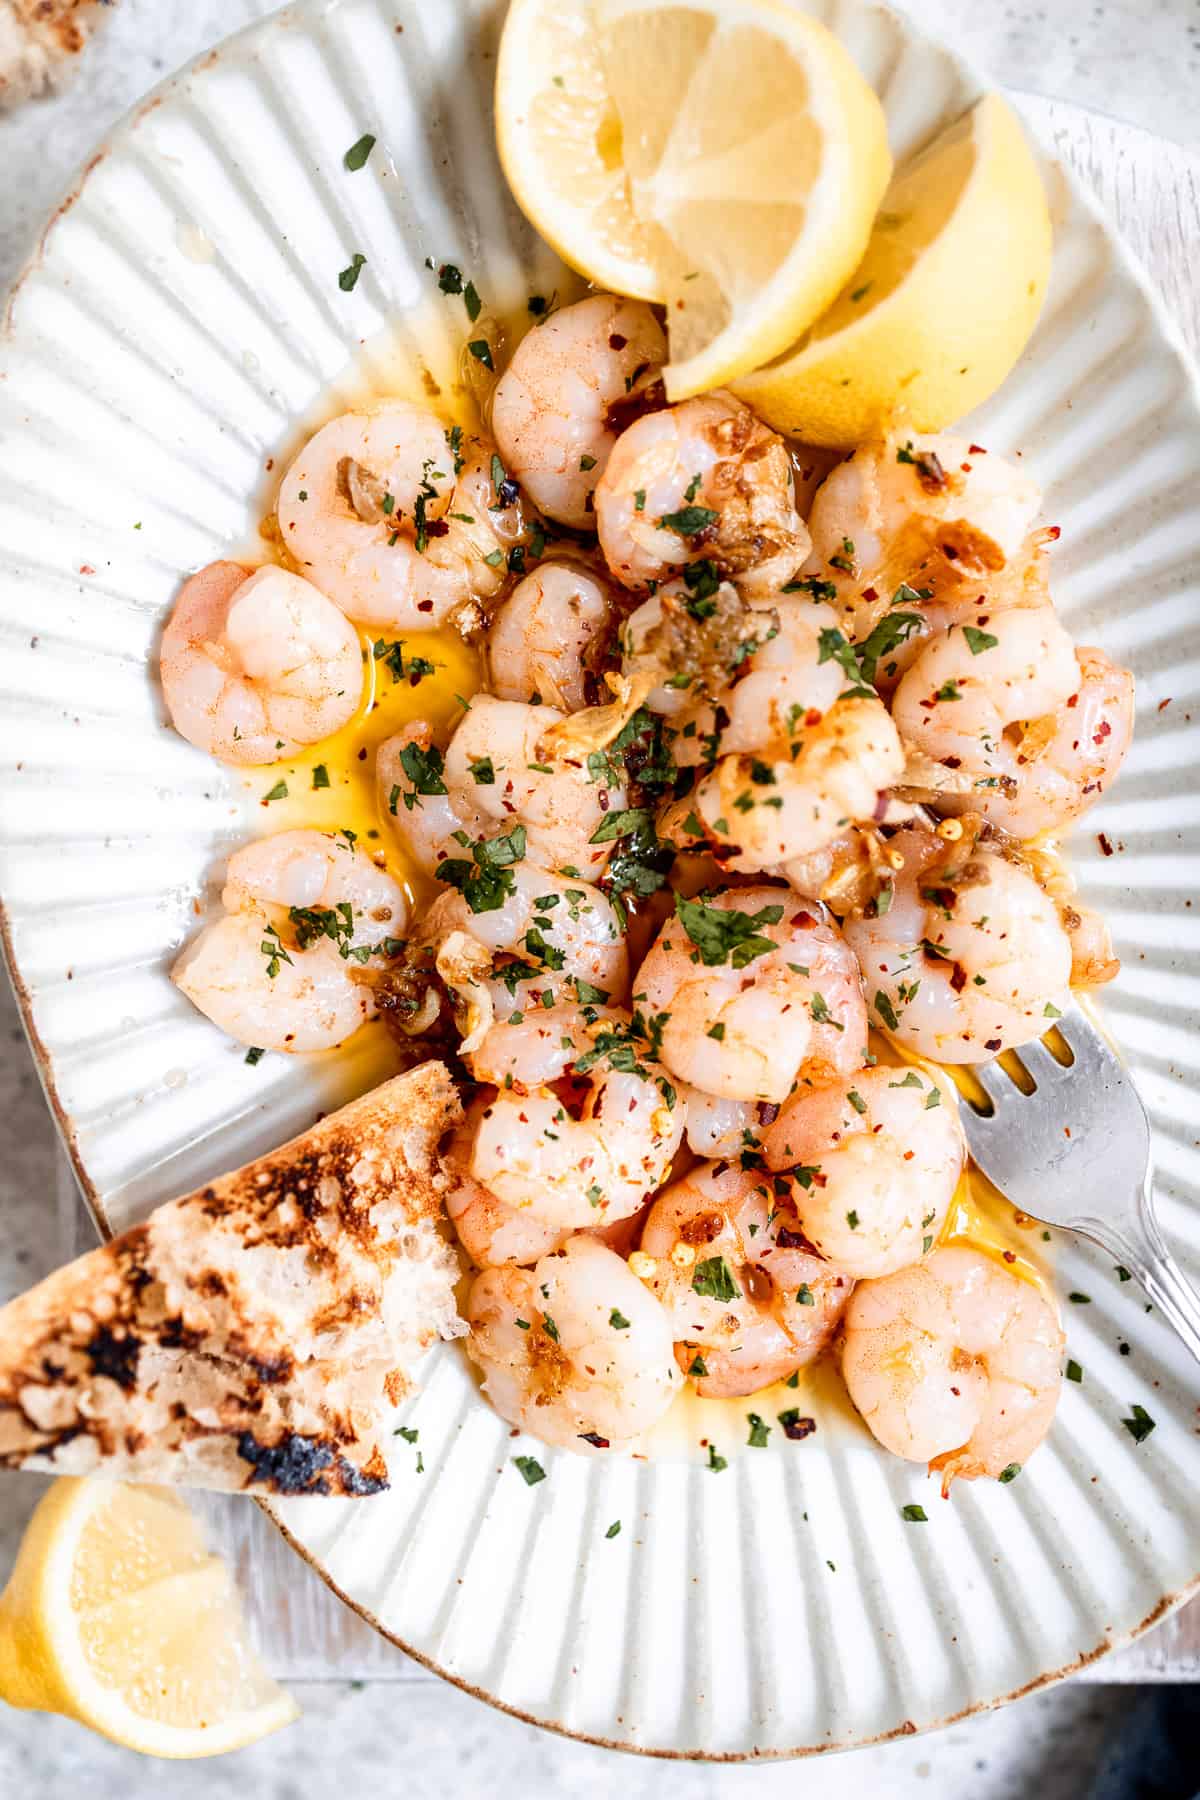 Spanish garlic prawns on a white plate with chillis and lemon.